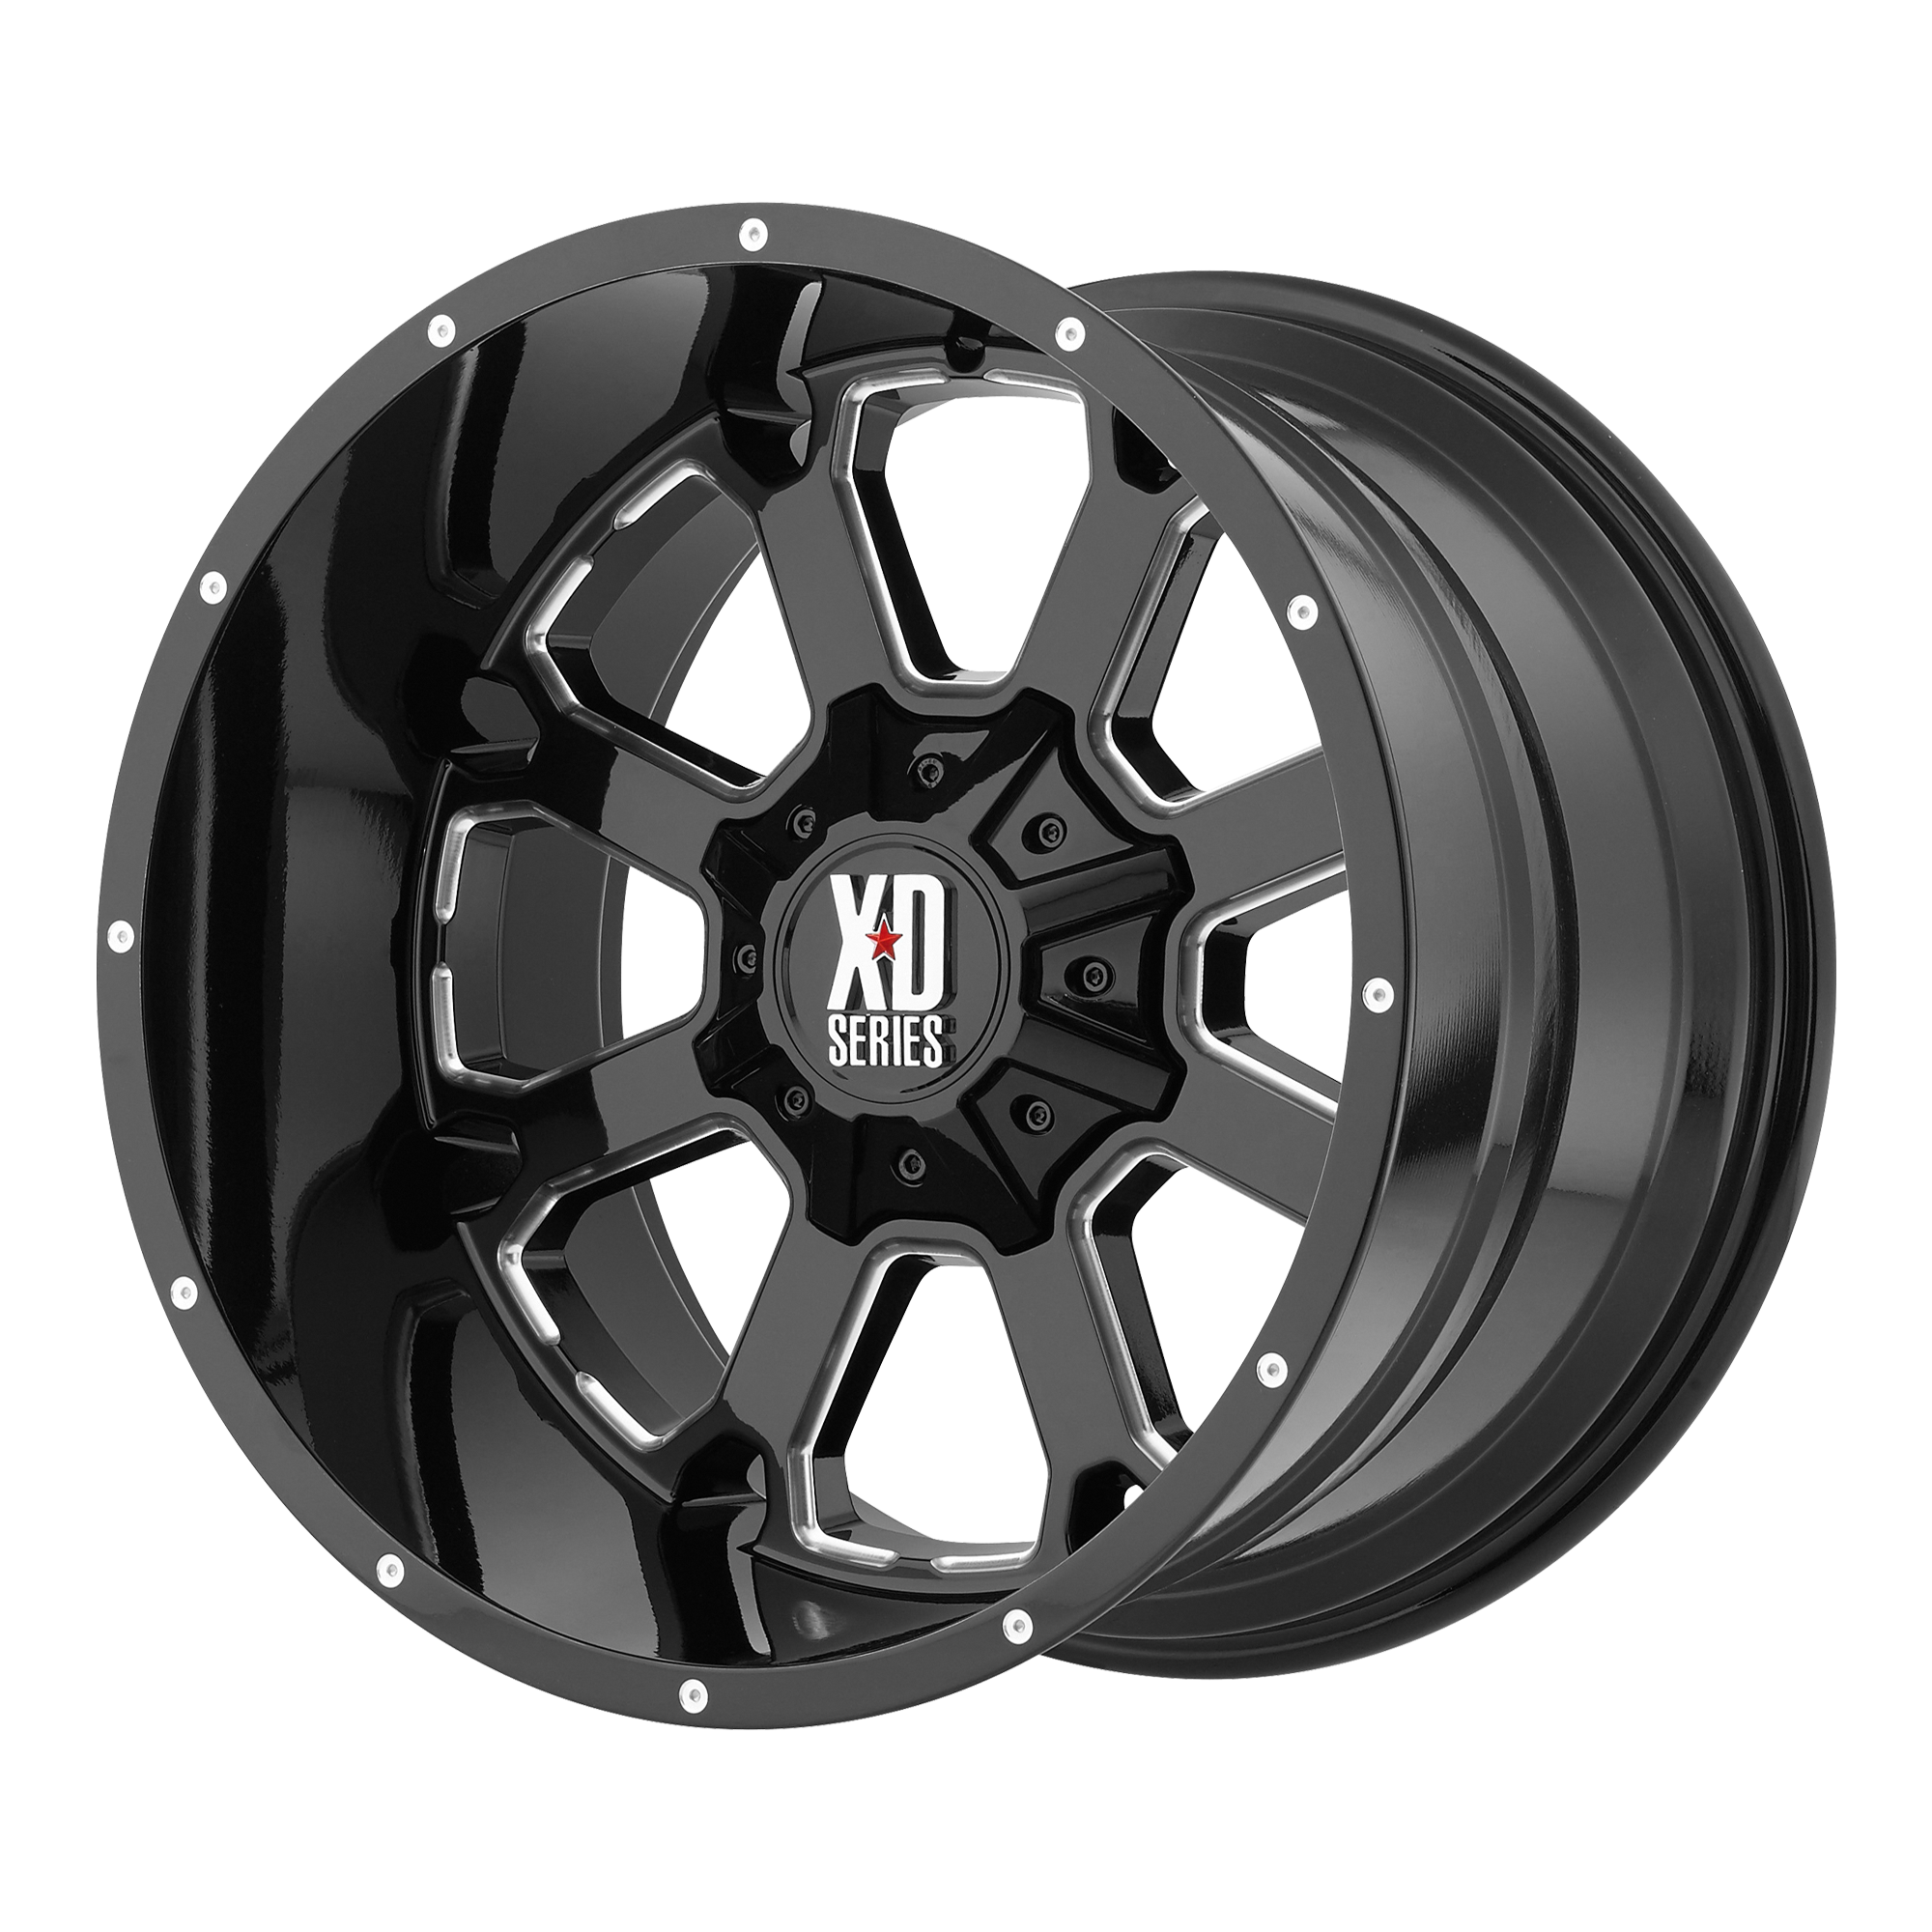 BUCK 25 22x10 5x150.00 GLOSS BLACK MILLED (-18 mm) - Tires and Engine Performance